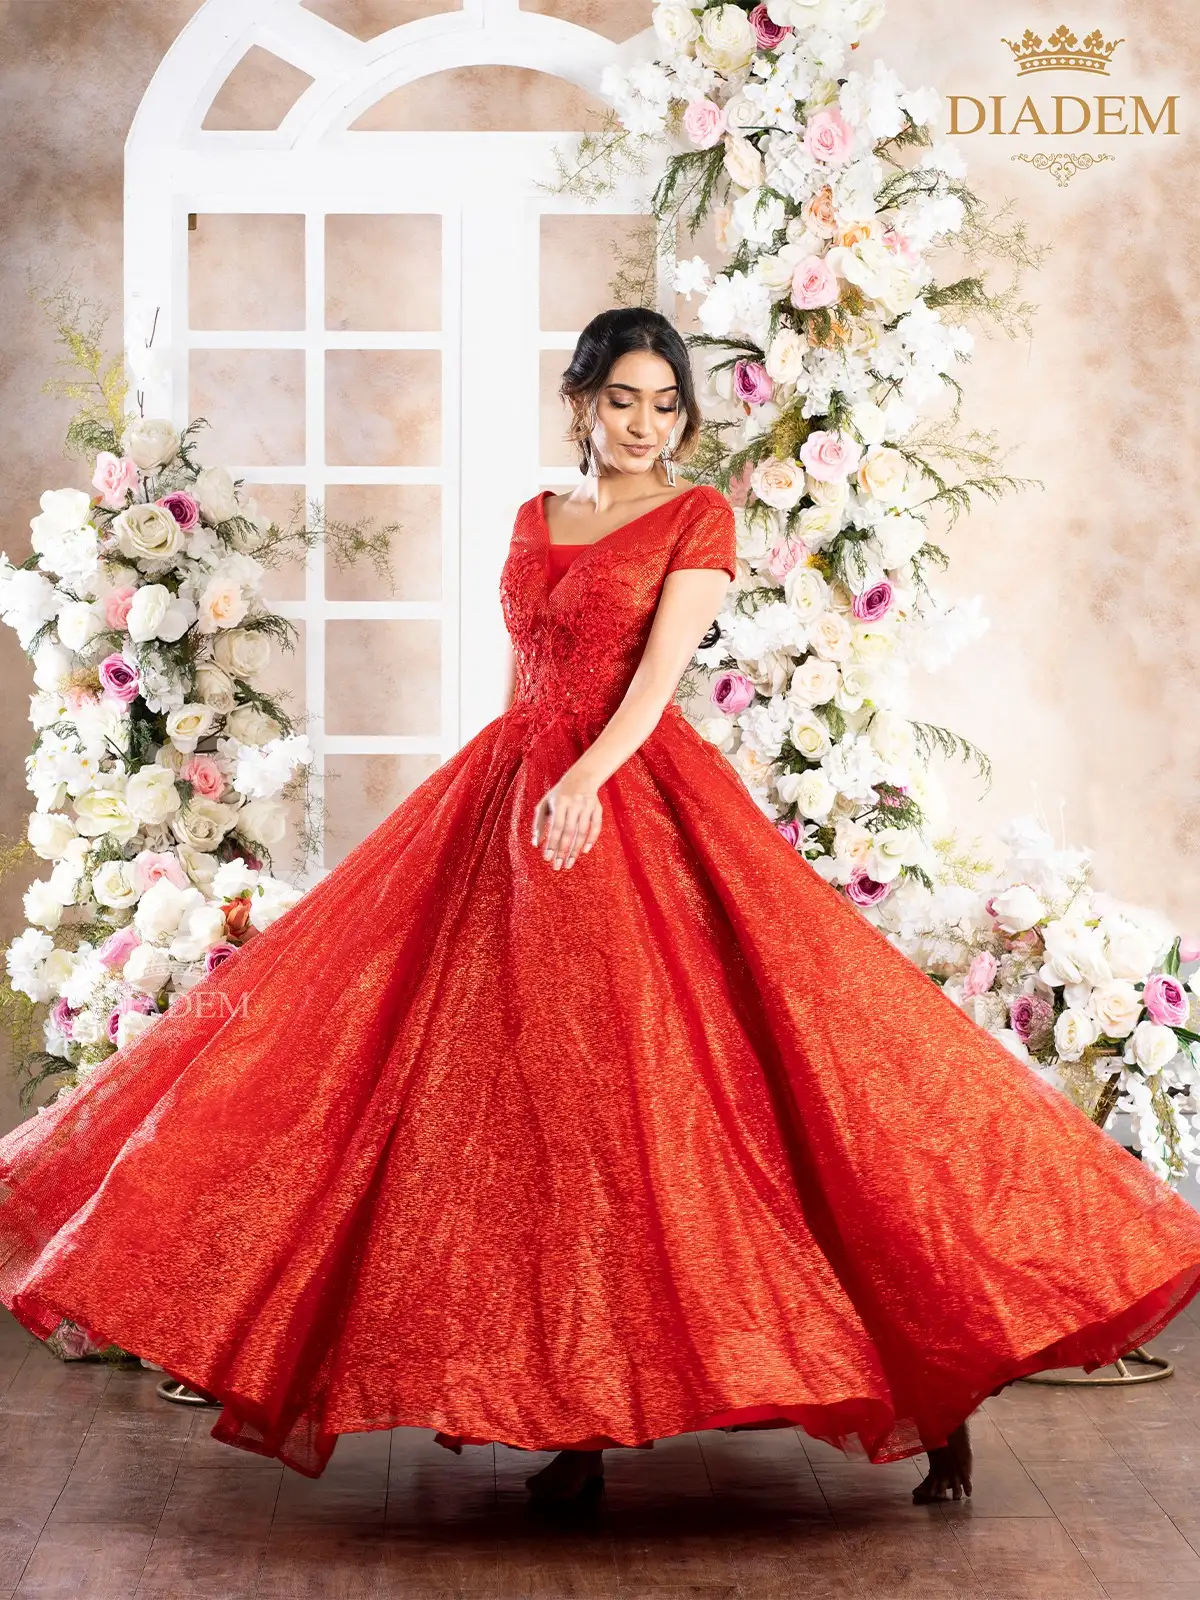 Red Net Ball Gown Embellished With Shimmers And Floral Laces